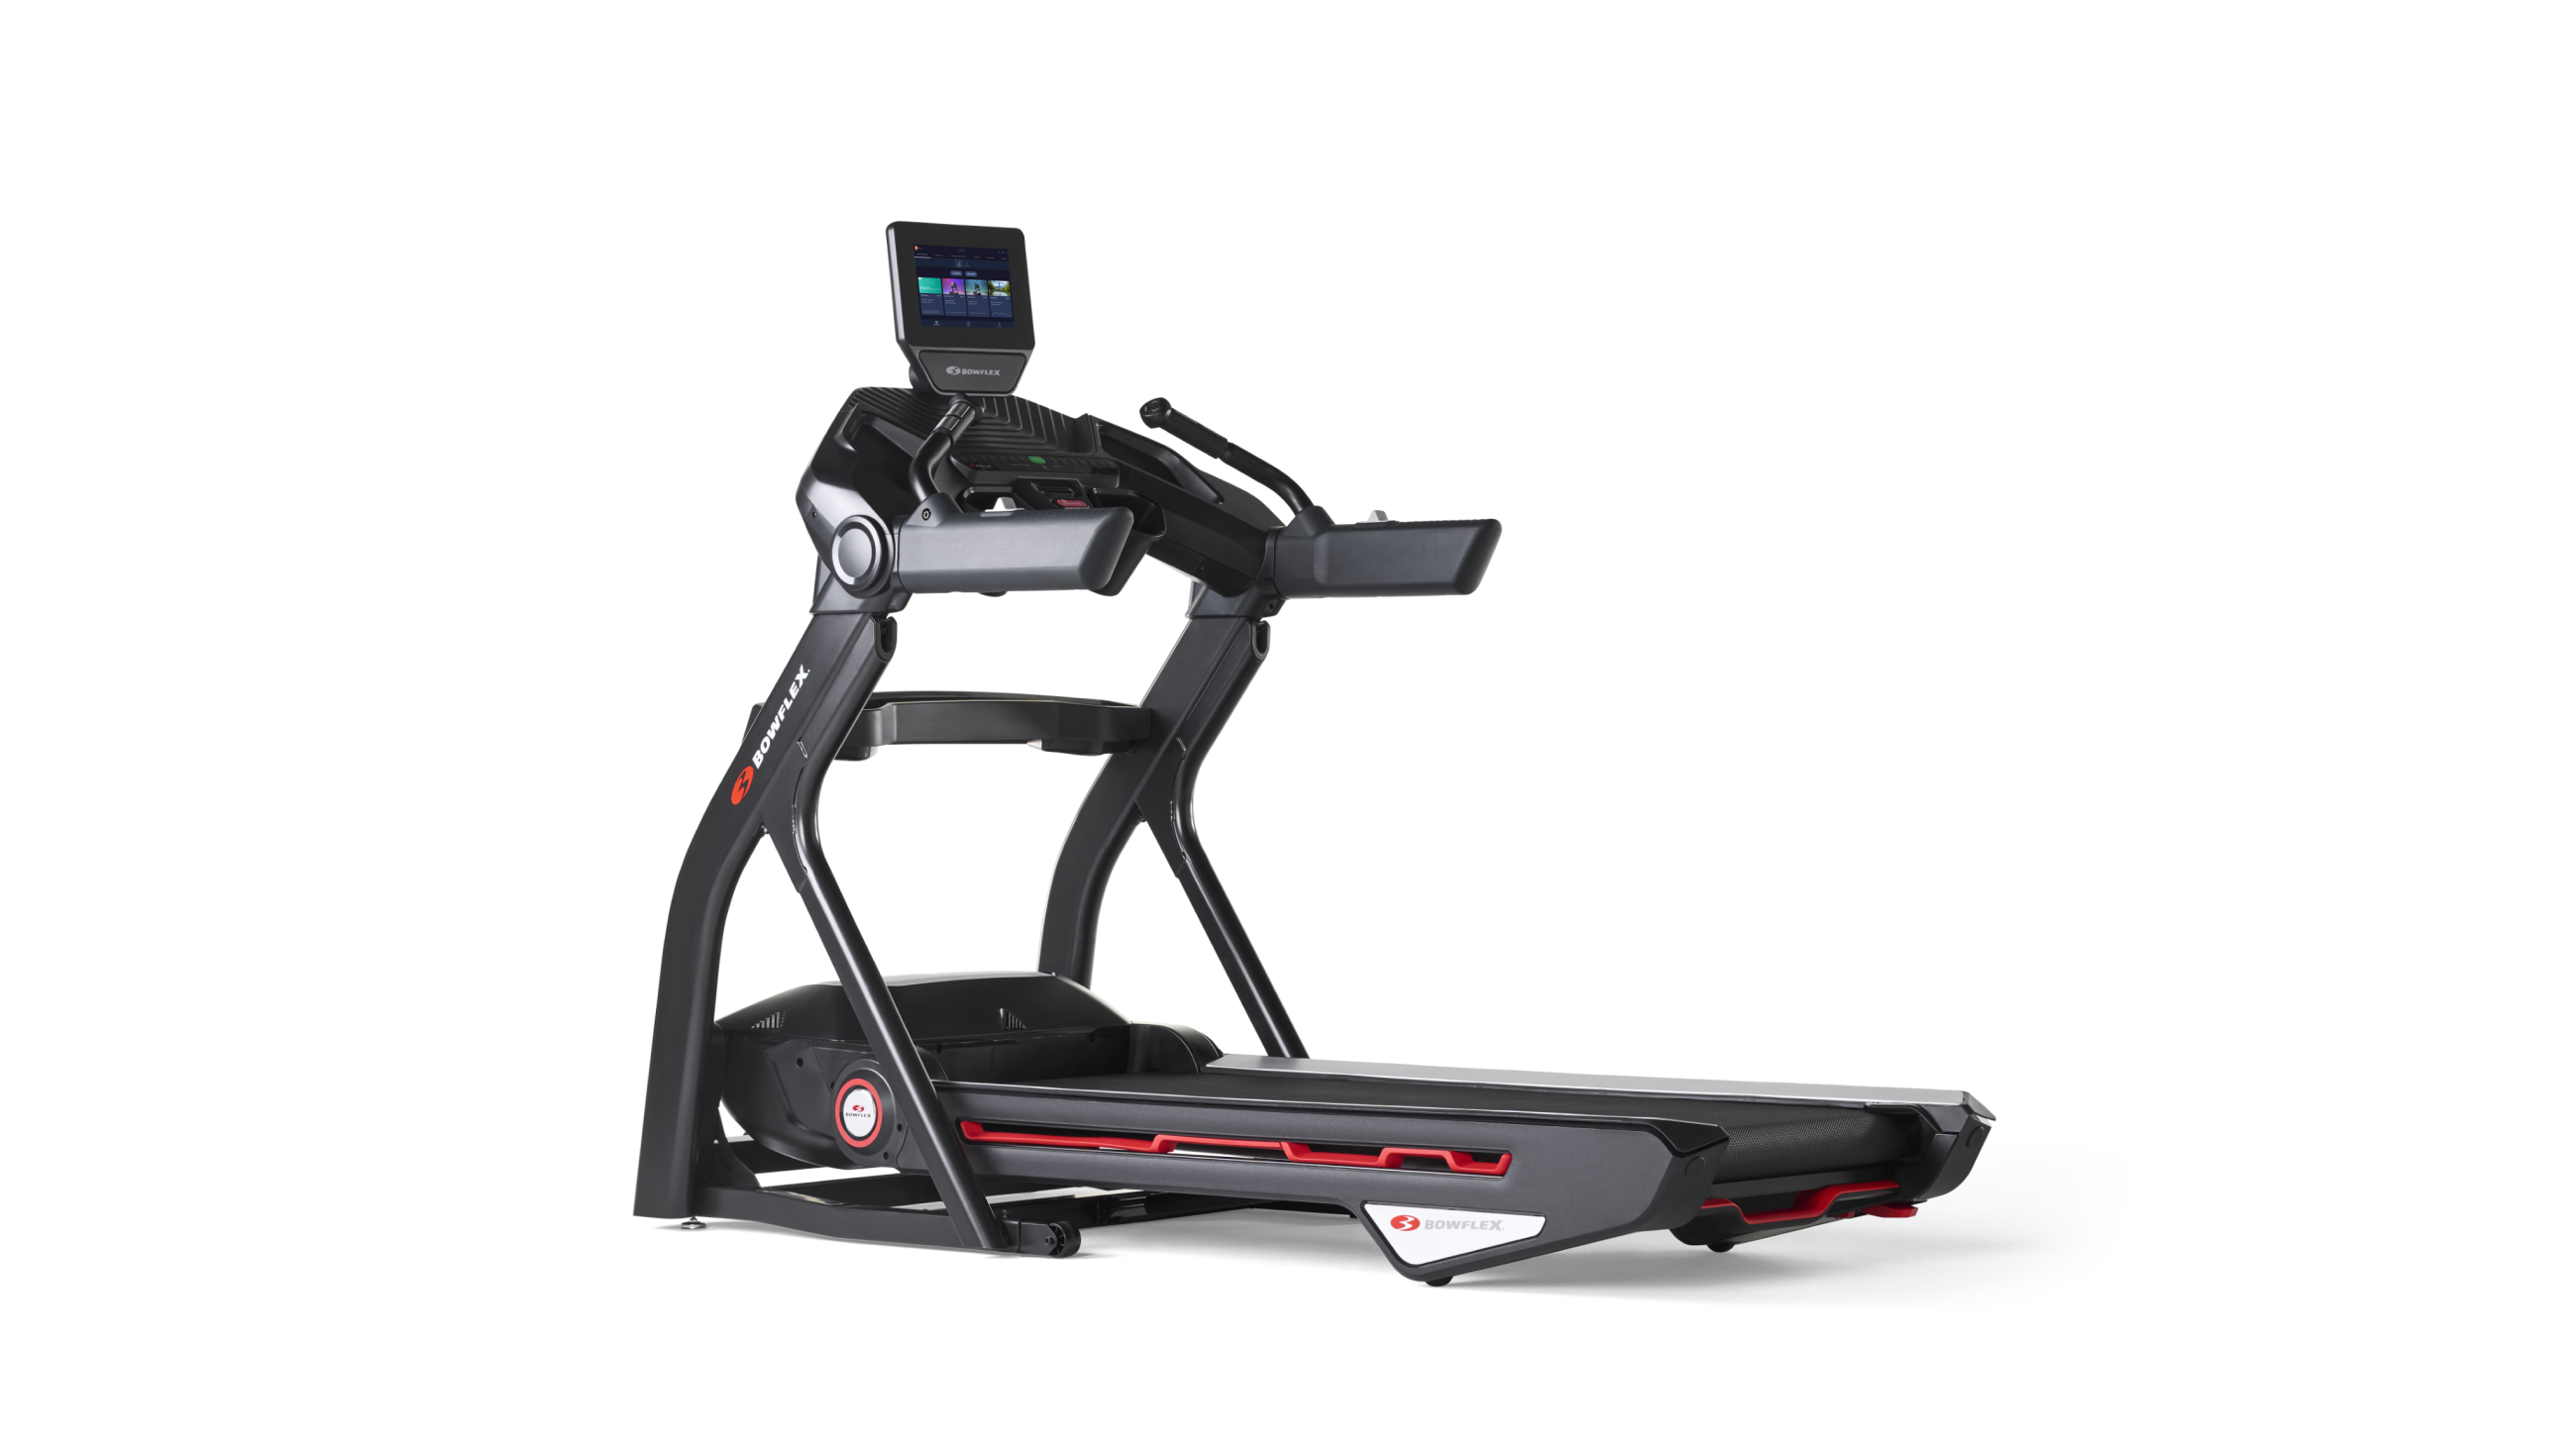 How to Choose a Treadmill: Motor, Cost, and More Specs